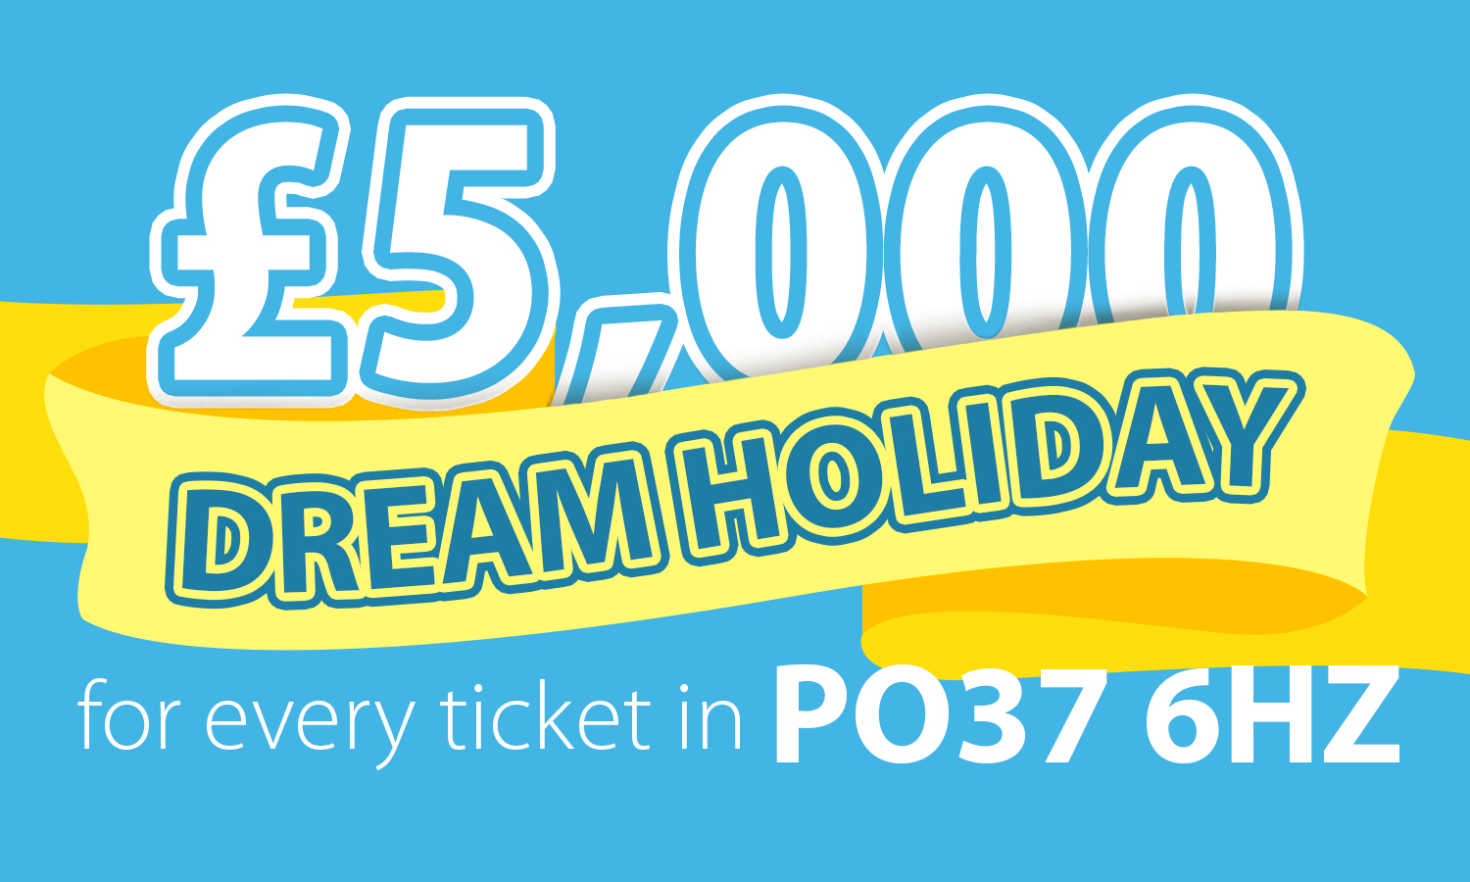 Players from Shanklin will be jetting off on fantastic trips after winning the Dream Holiday prize this month